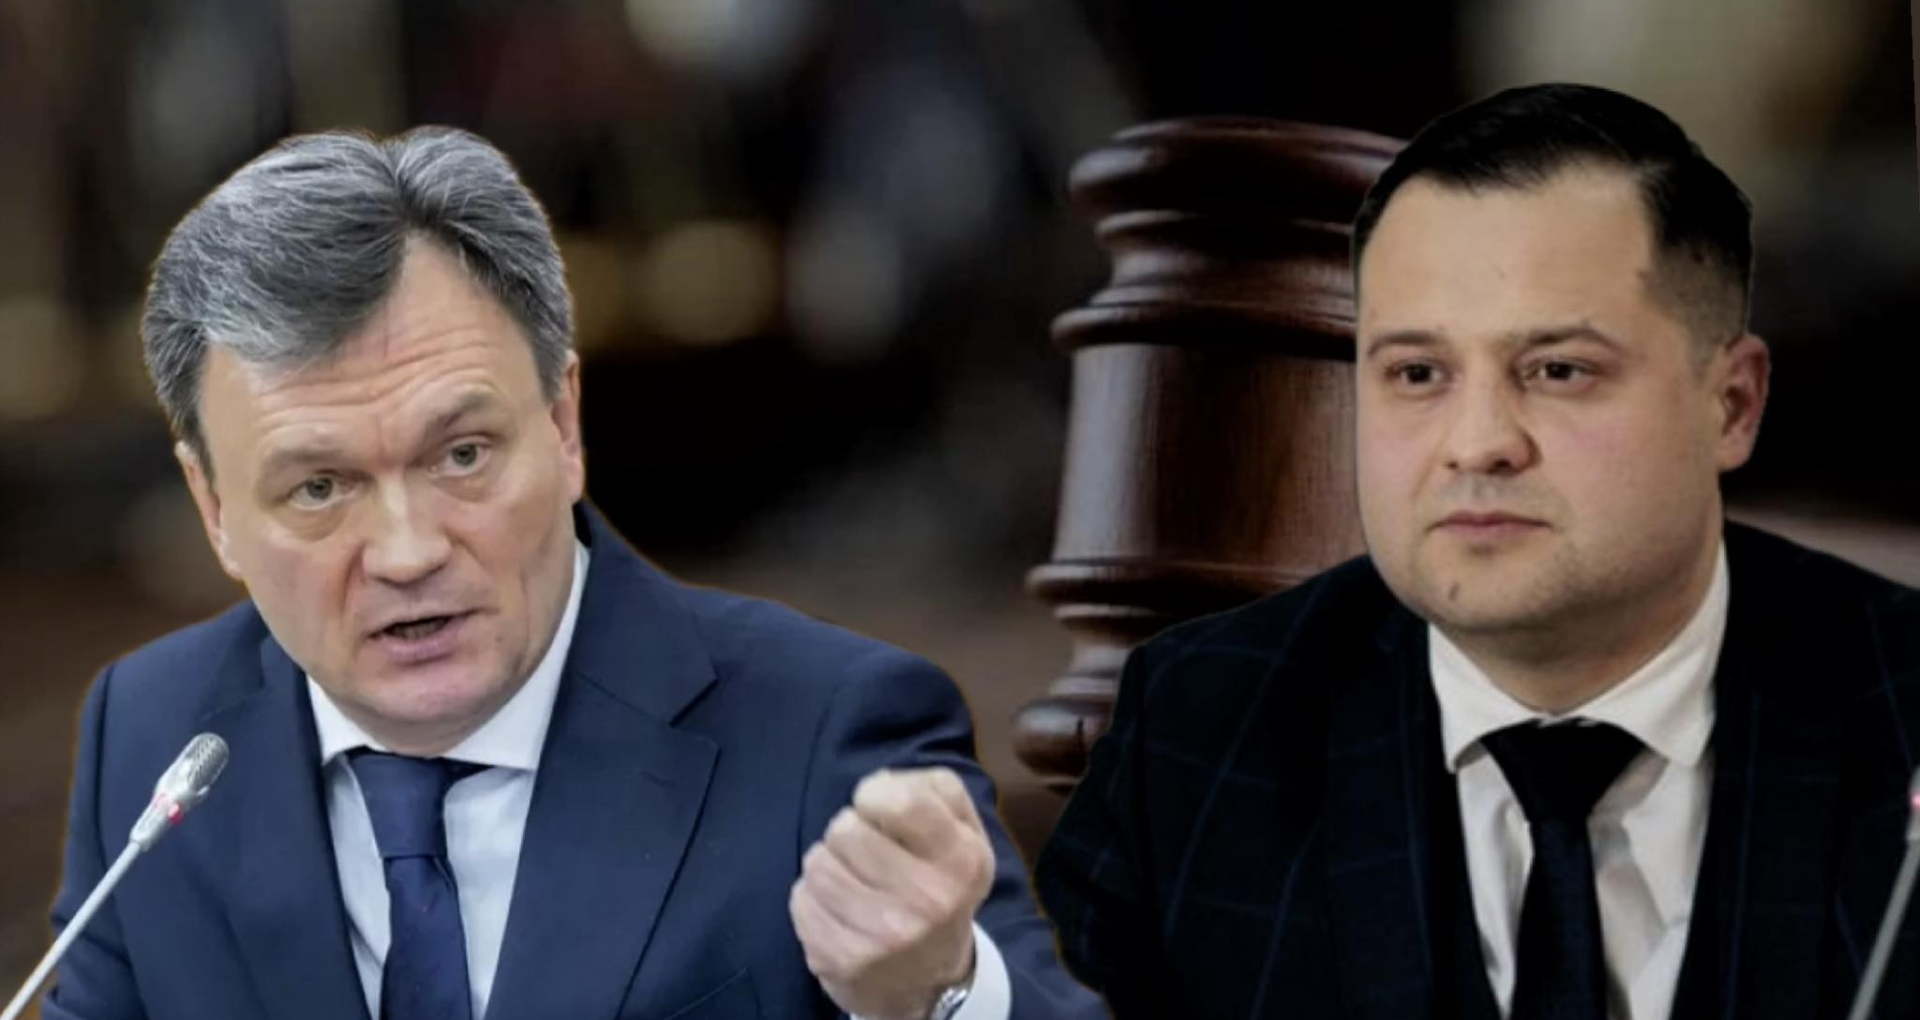 The request for Igor Dodon to participate in a live interview in the studio of a TV station was rejected as unfounded